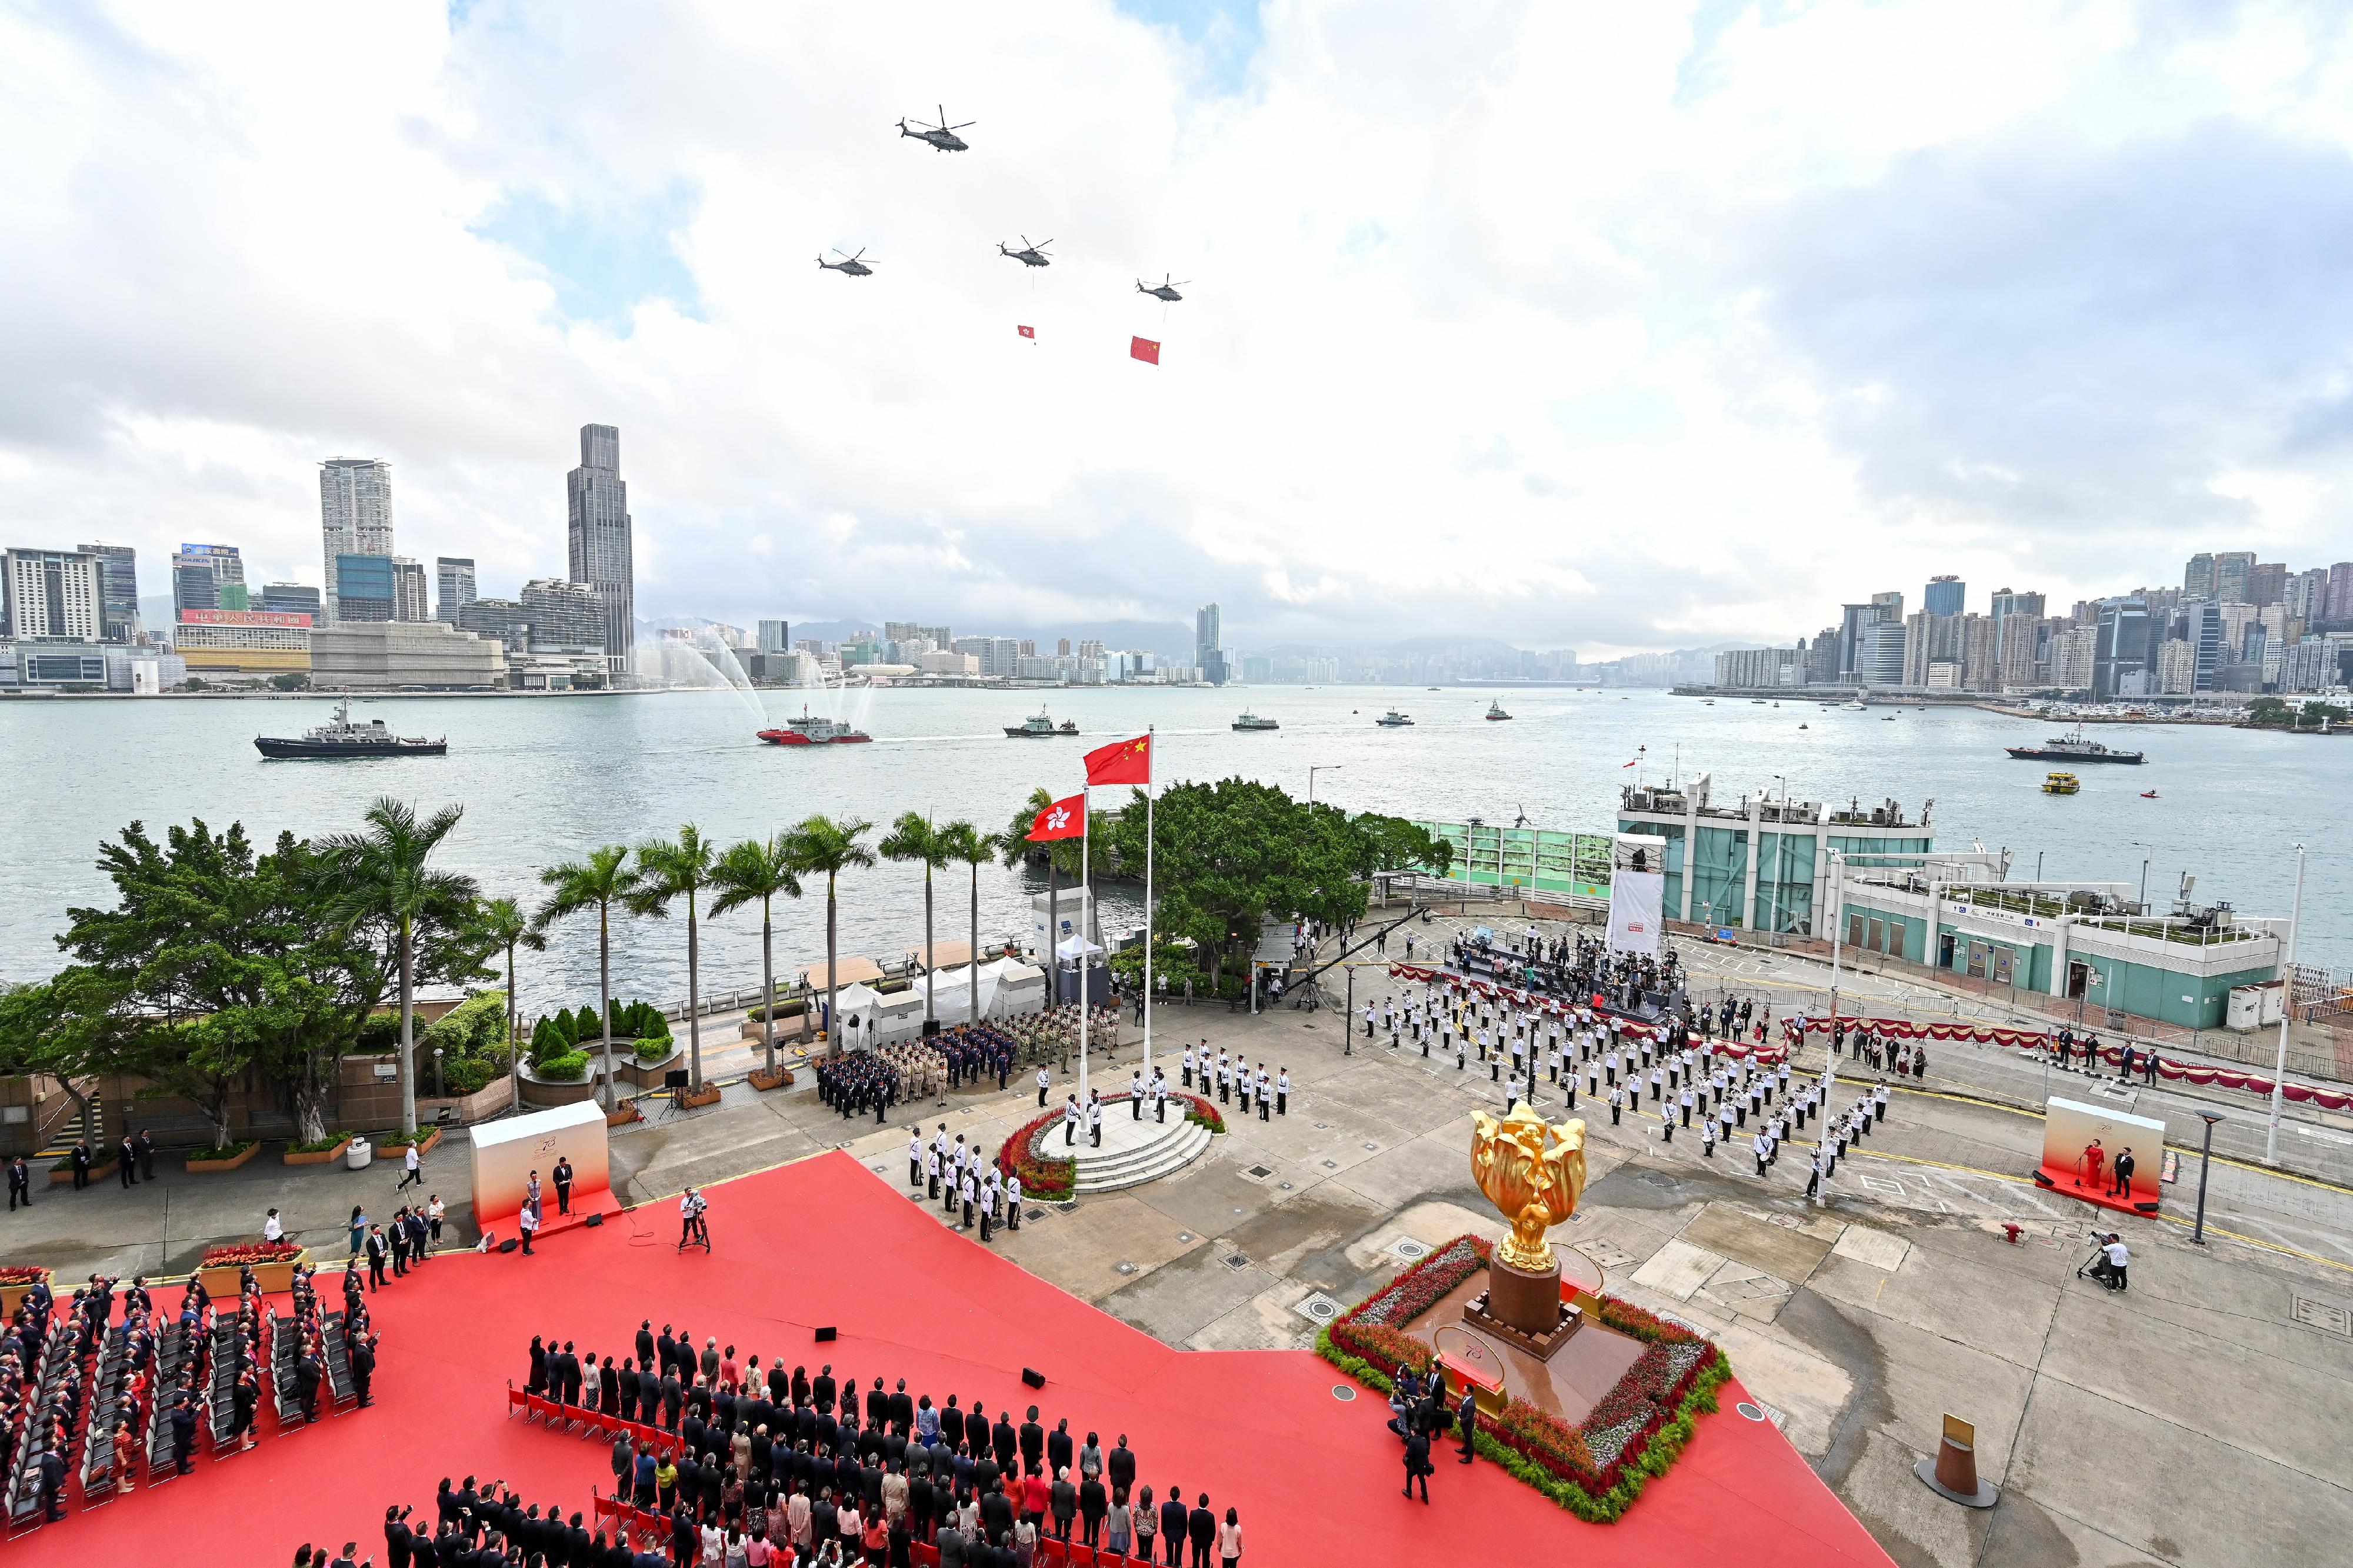 The disciplined services and the Government Flying Service perform a sea parade and a fly-past to mark the 73rd anniversary of the founding of the People's Republic of China at the flag-raising ceremony at Golden Bauhinia Square in Wan Chai this morning (October 1).